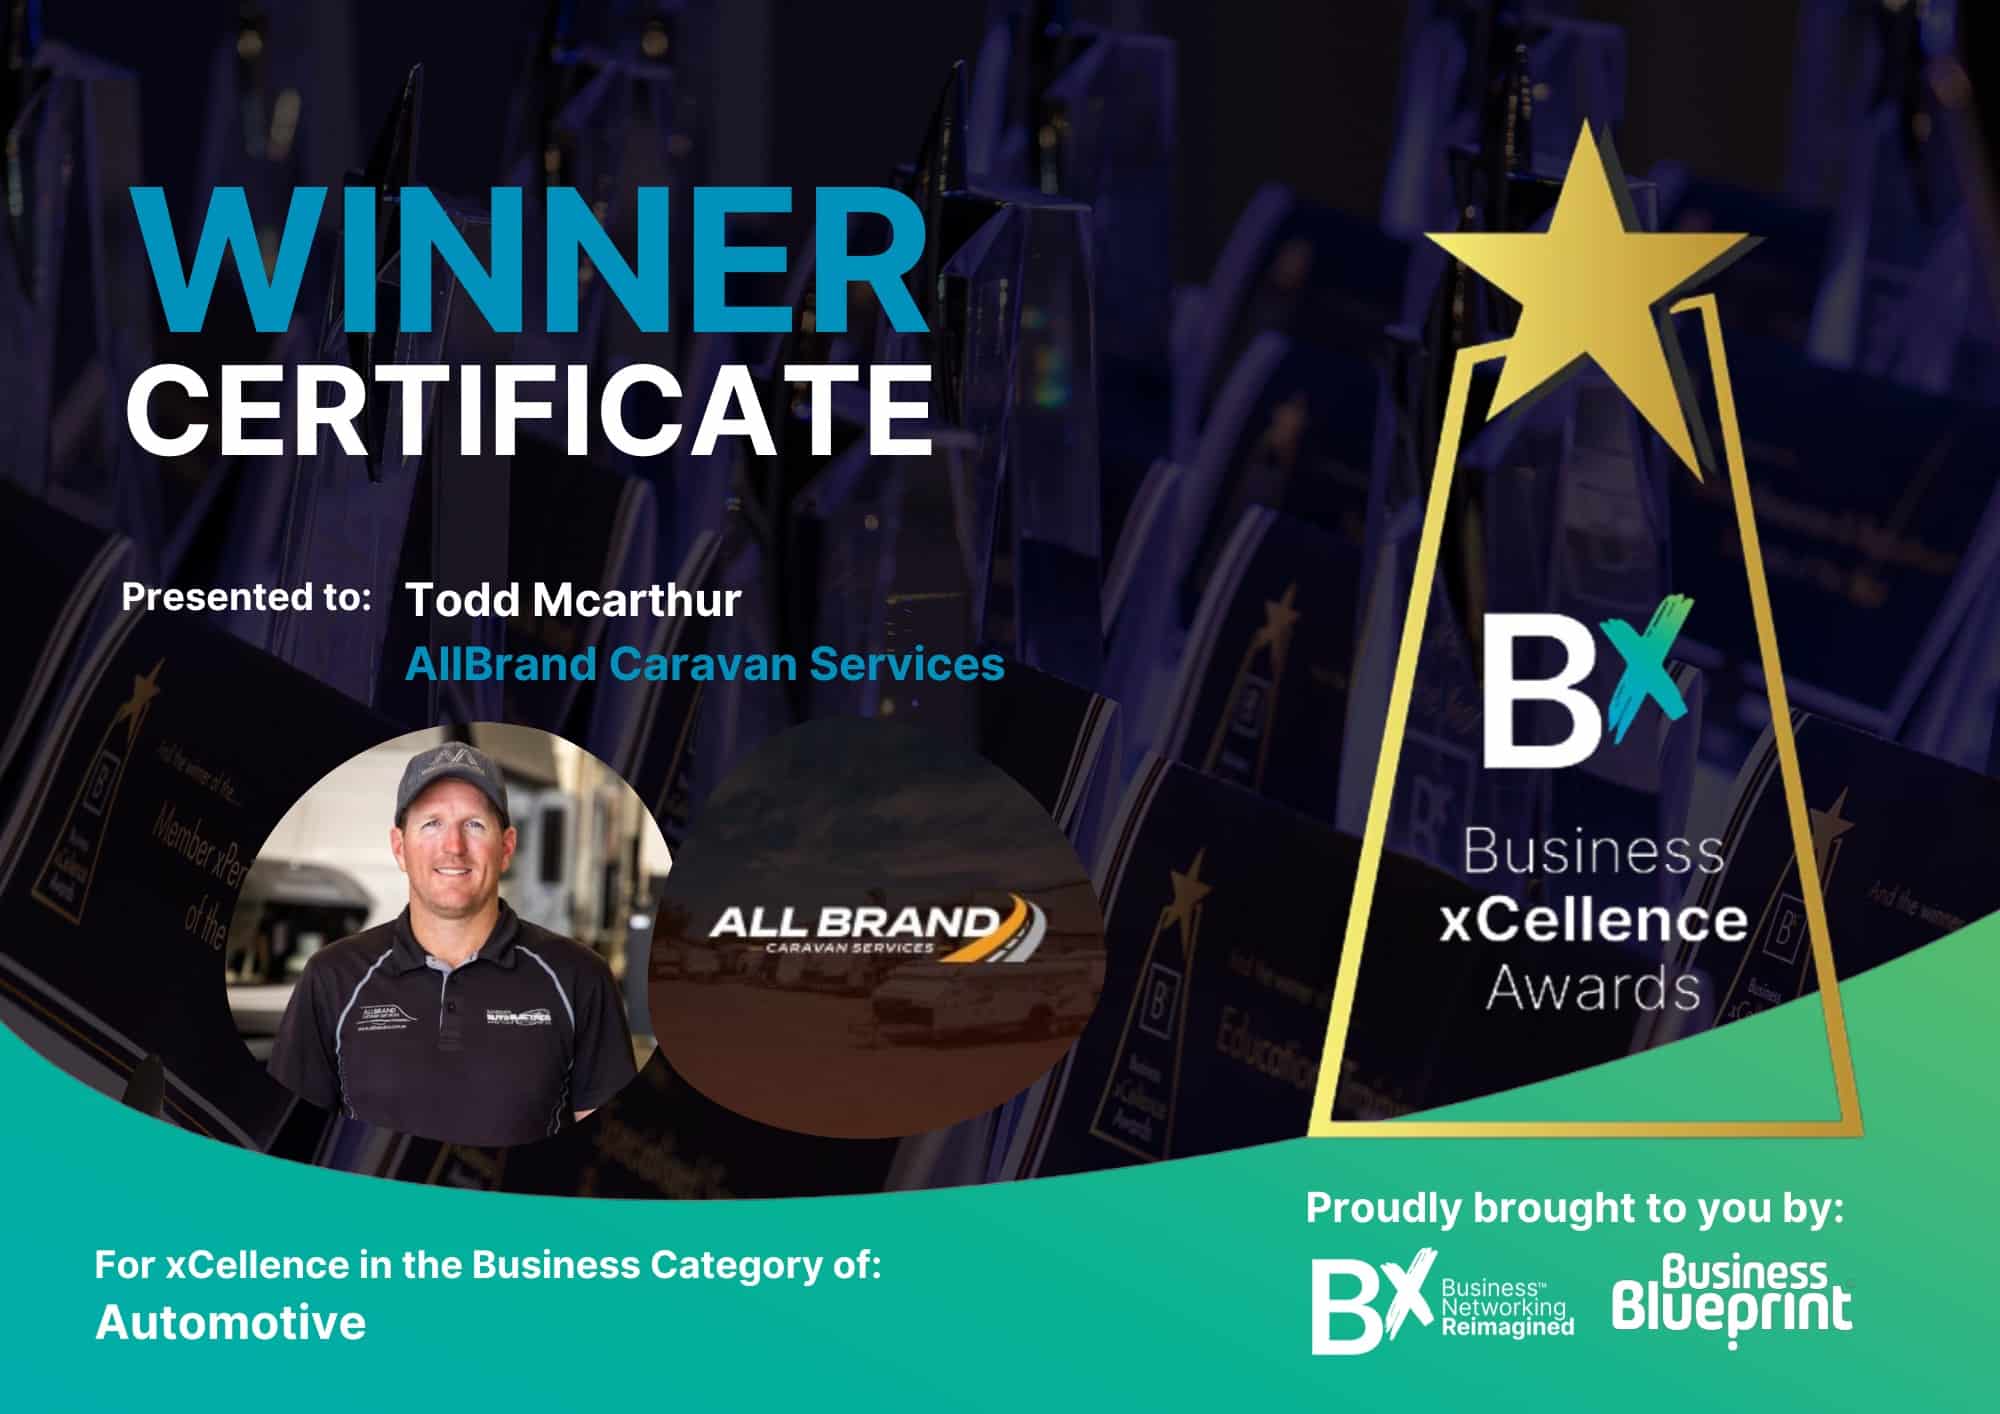 Business xcellence awards nomination